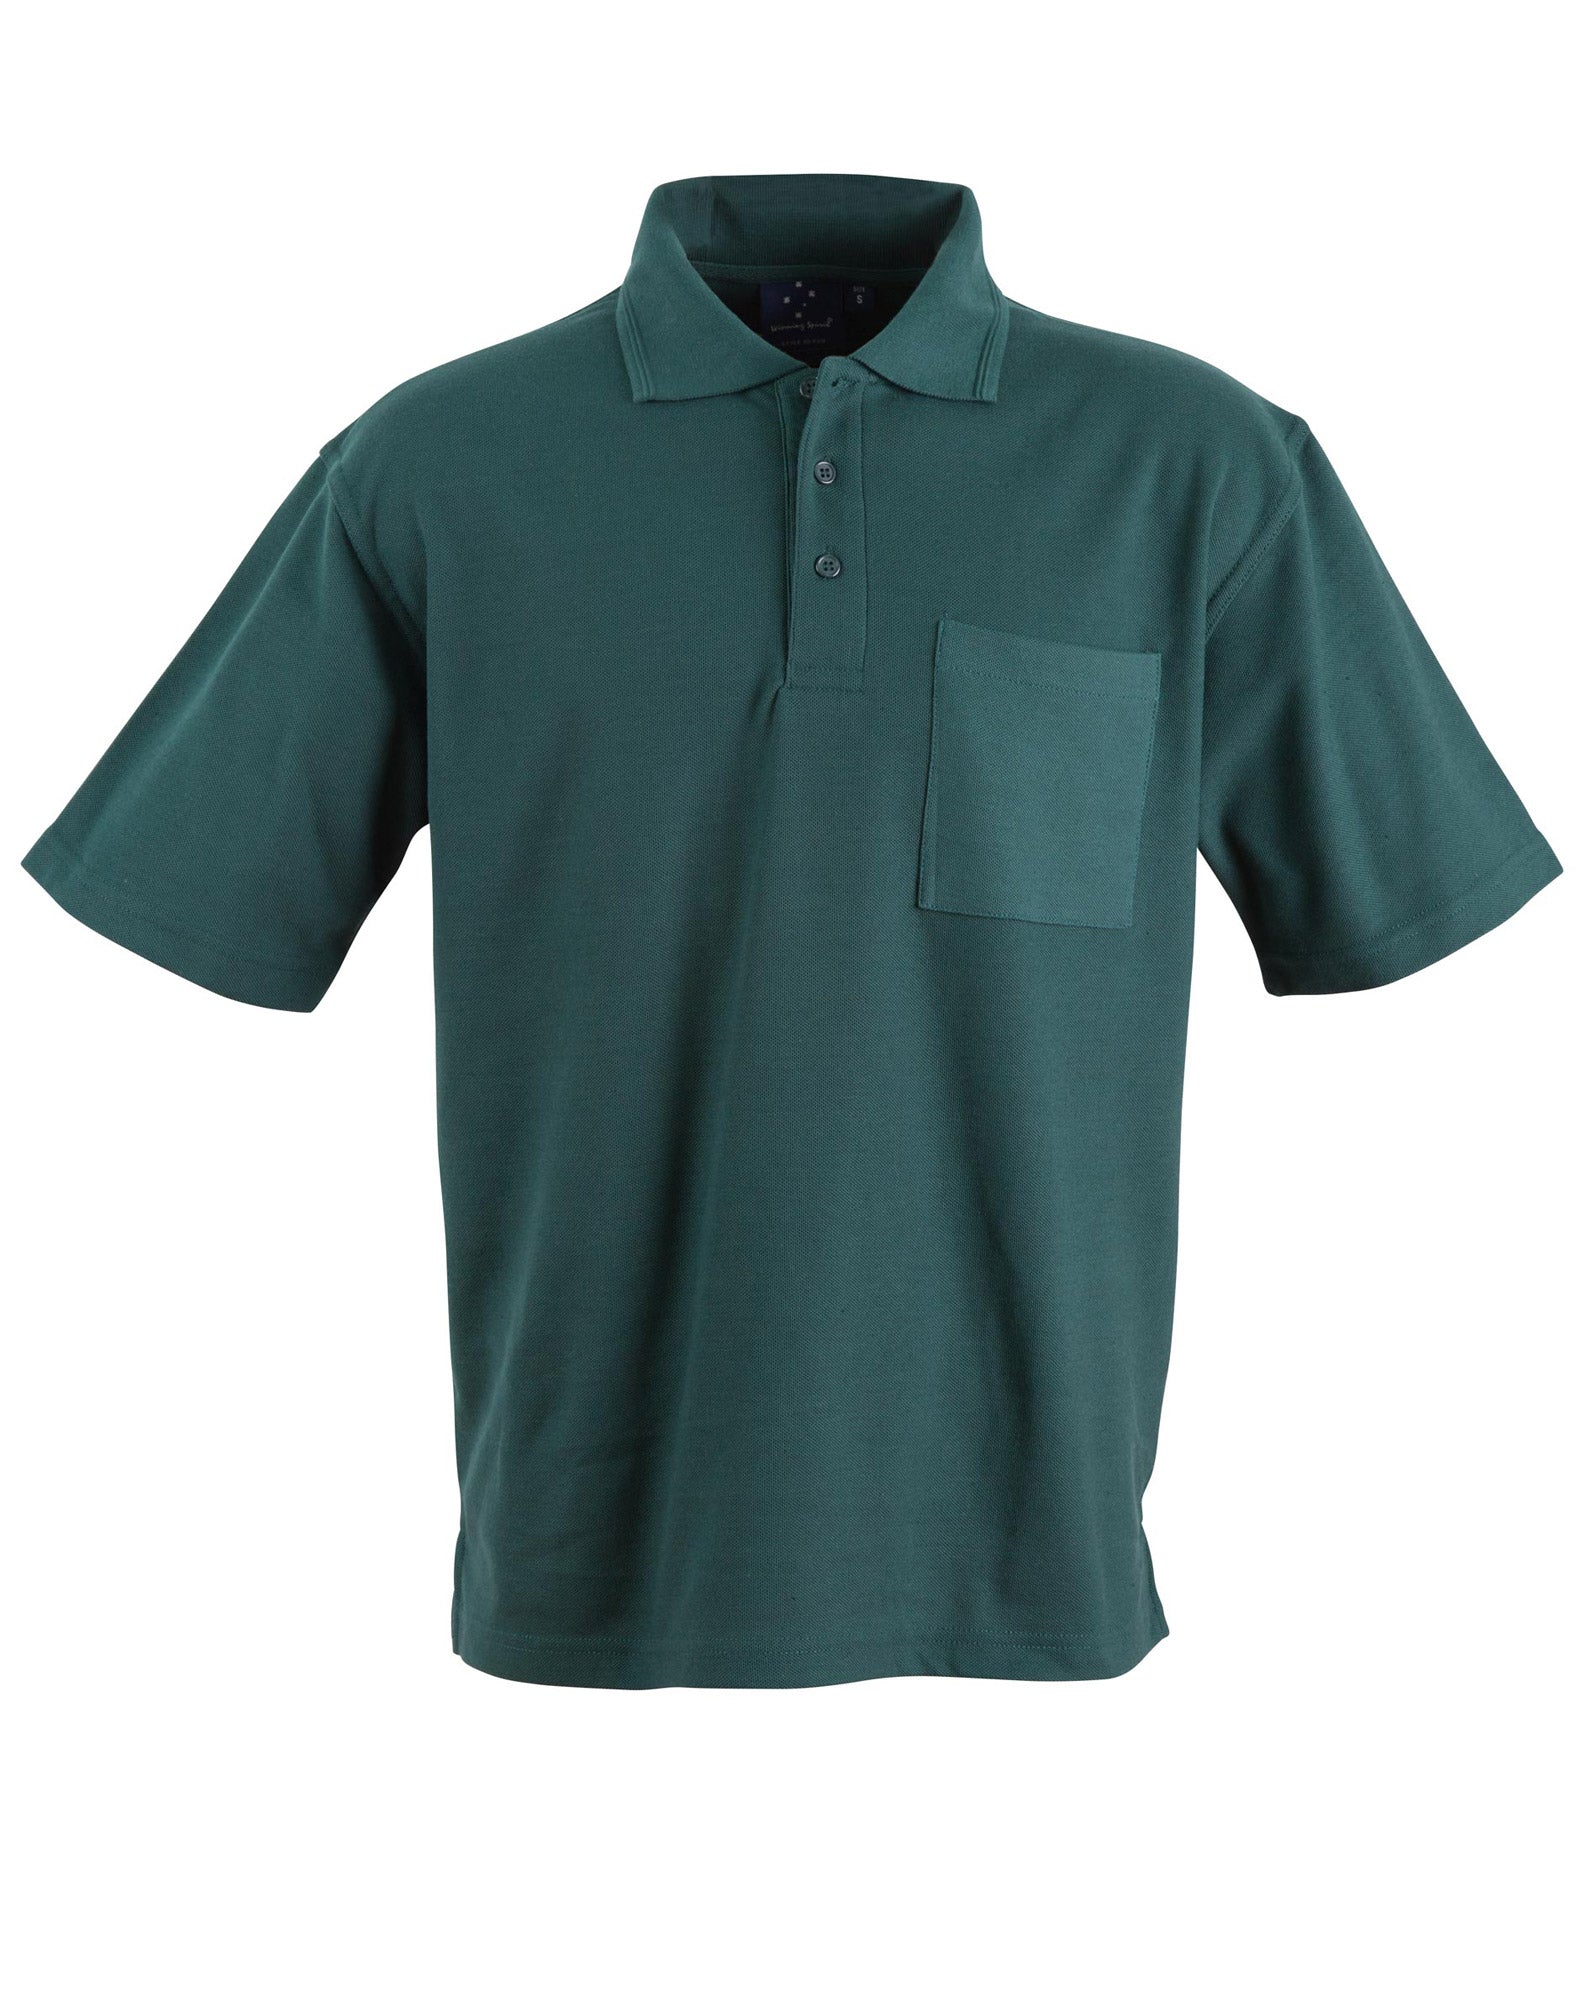 Poly/cotton Pocket Polo - made by AIW